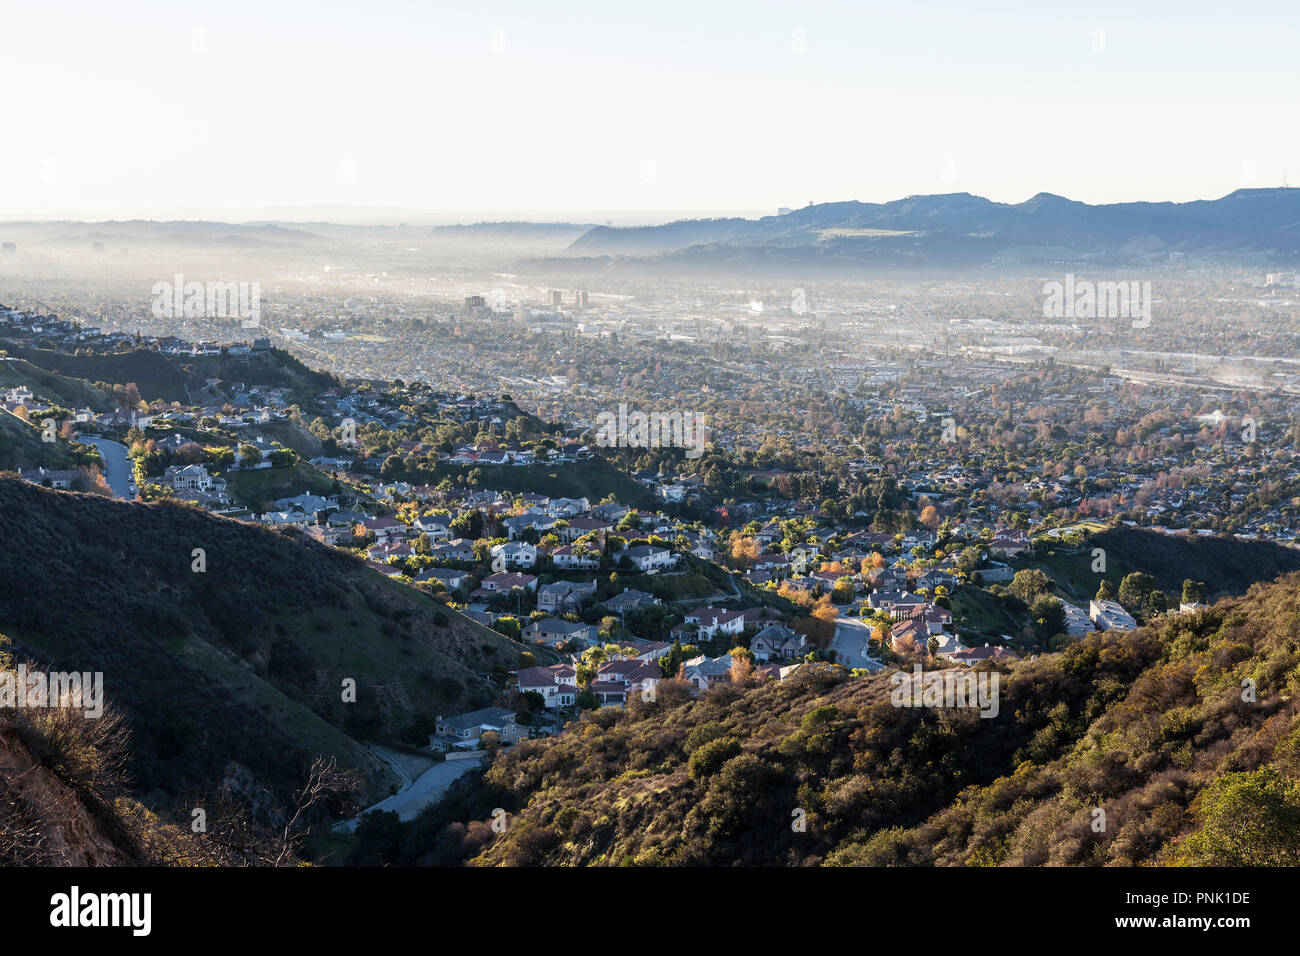 Smoggy hilltop view of canyon homes and downtown Burbank with the San Fernando Valley, the Santa Monica Mountains and Los Angeles California in backgr Stock Photo